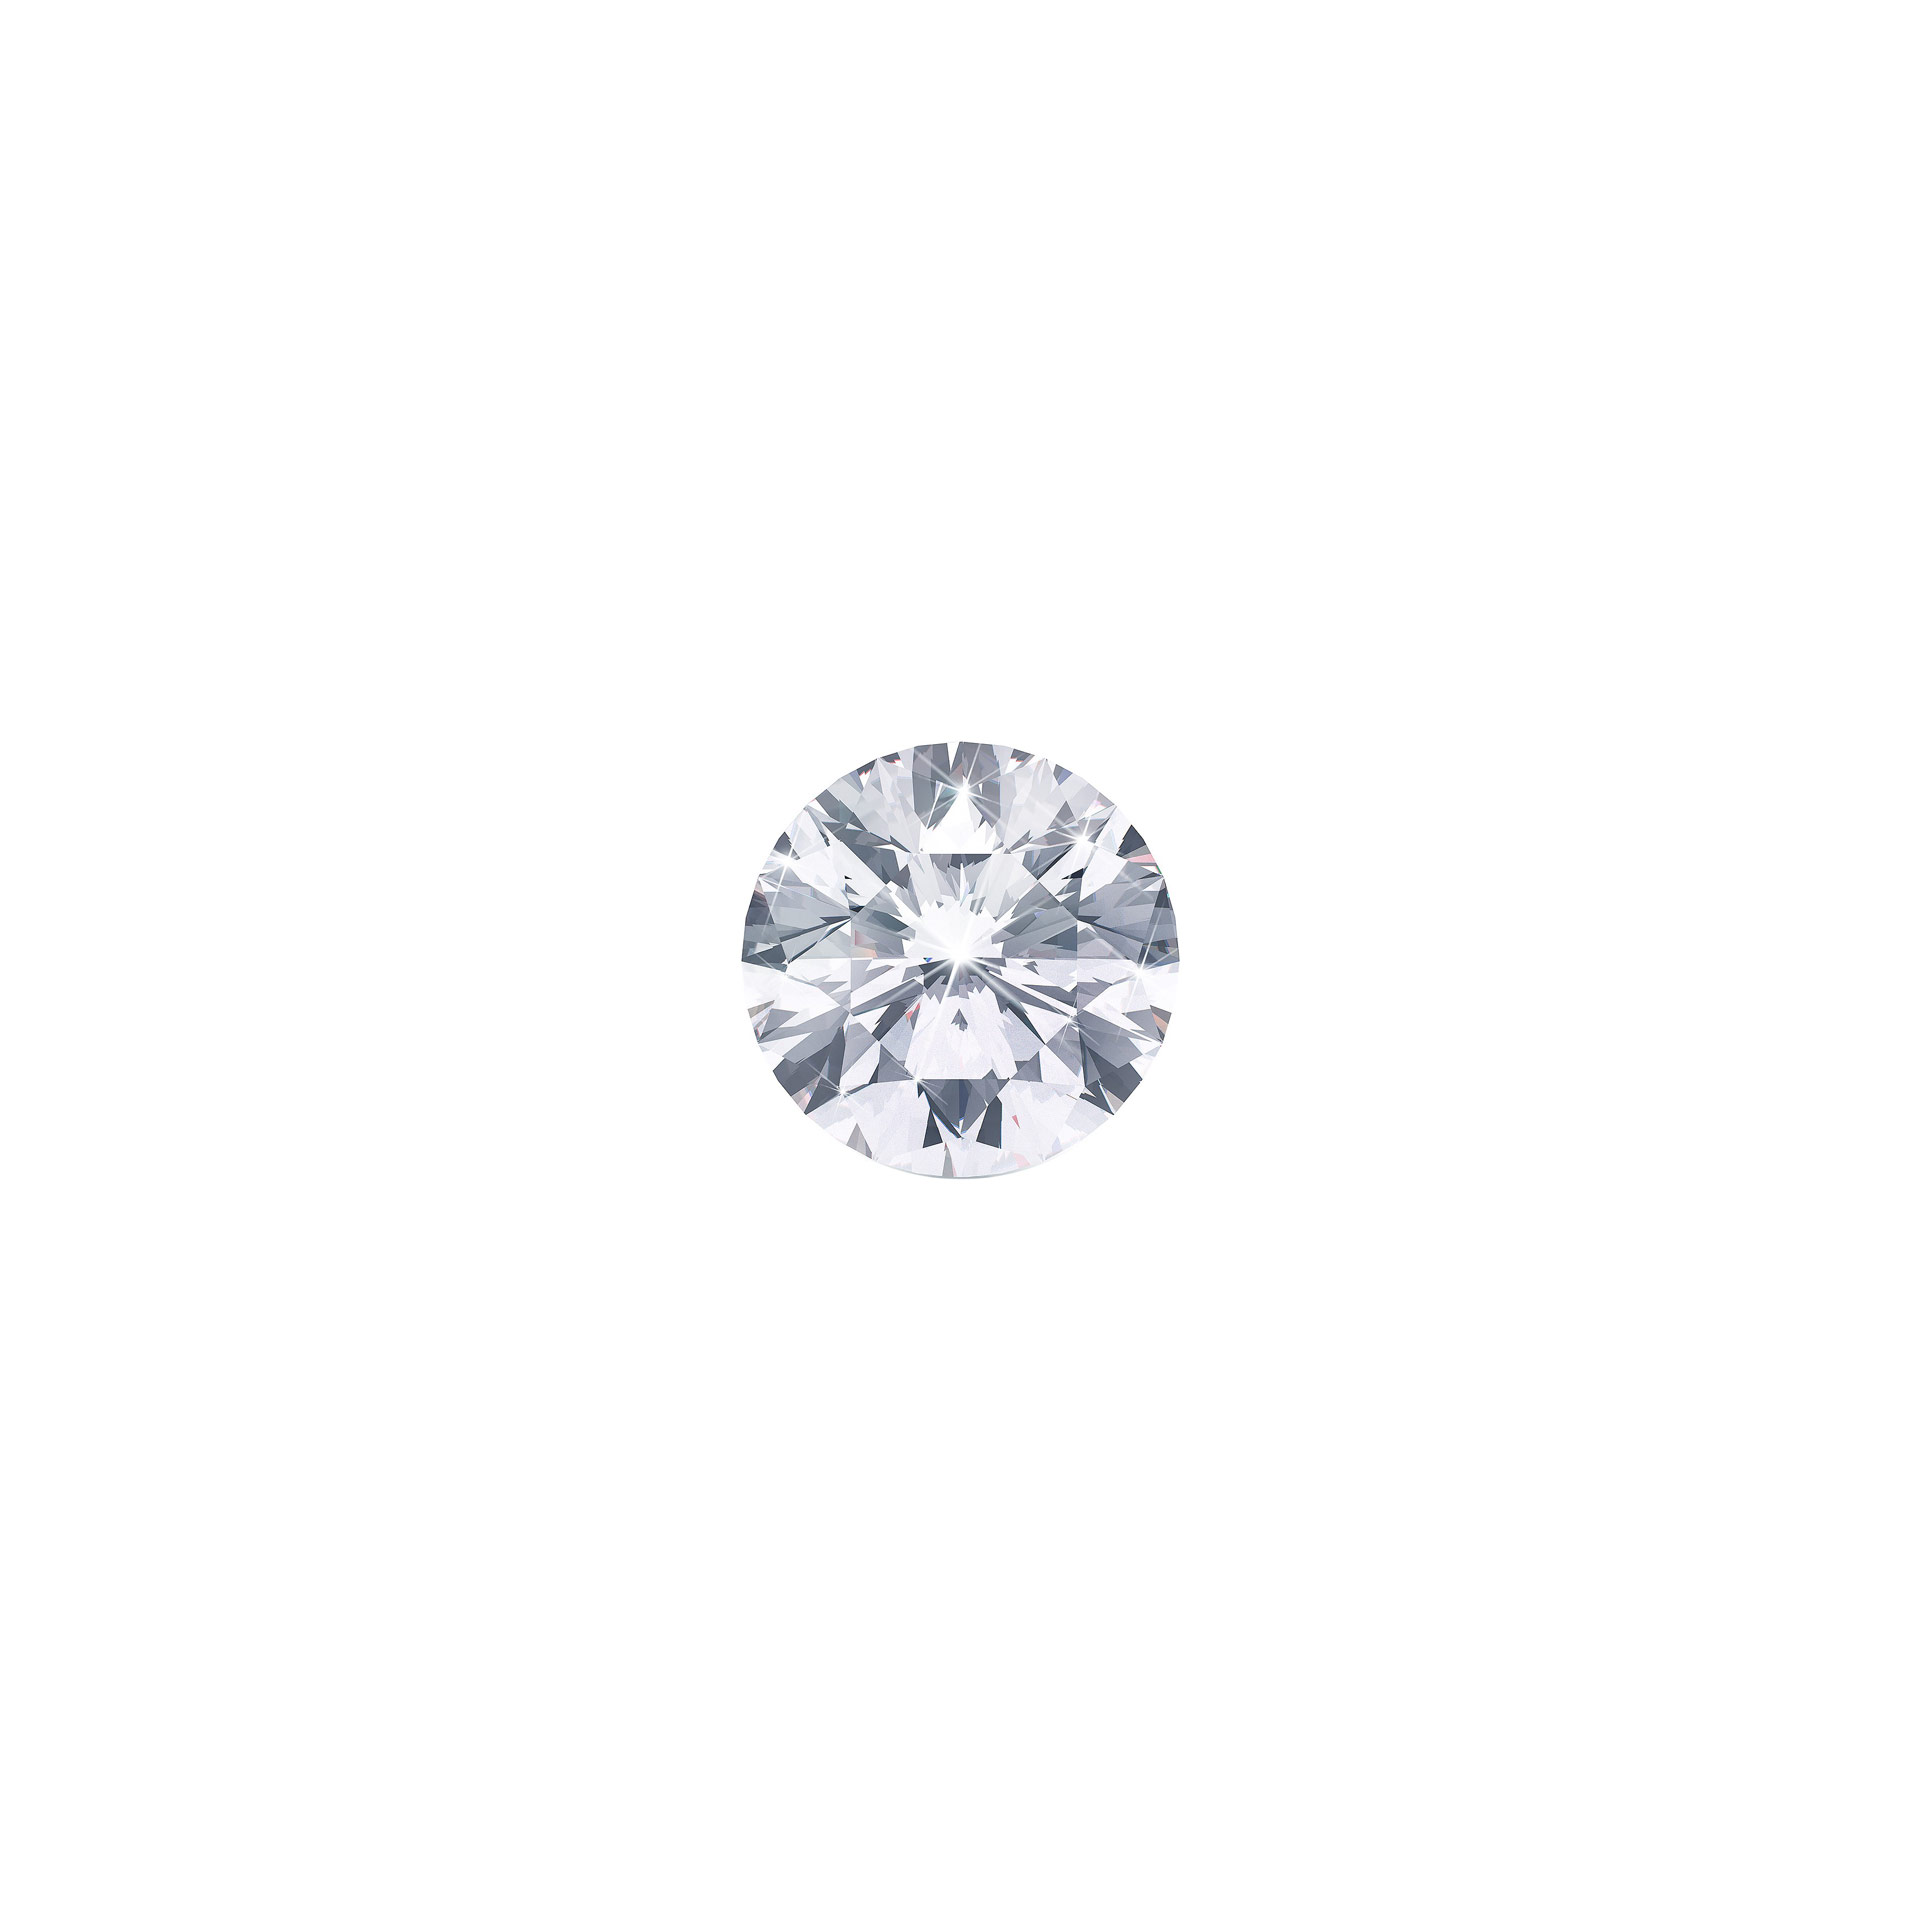 Gia Certified Round Diamond .70 Carats (H color, SI2 clarity)